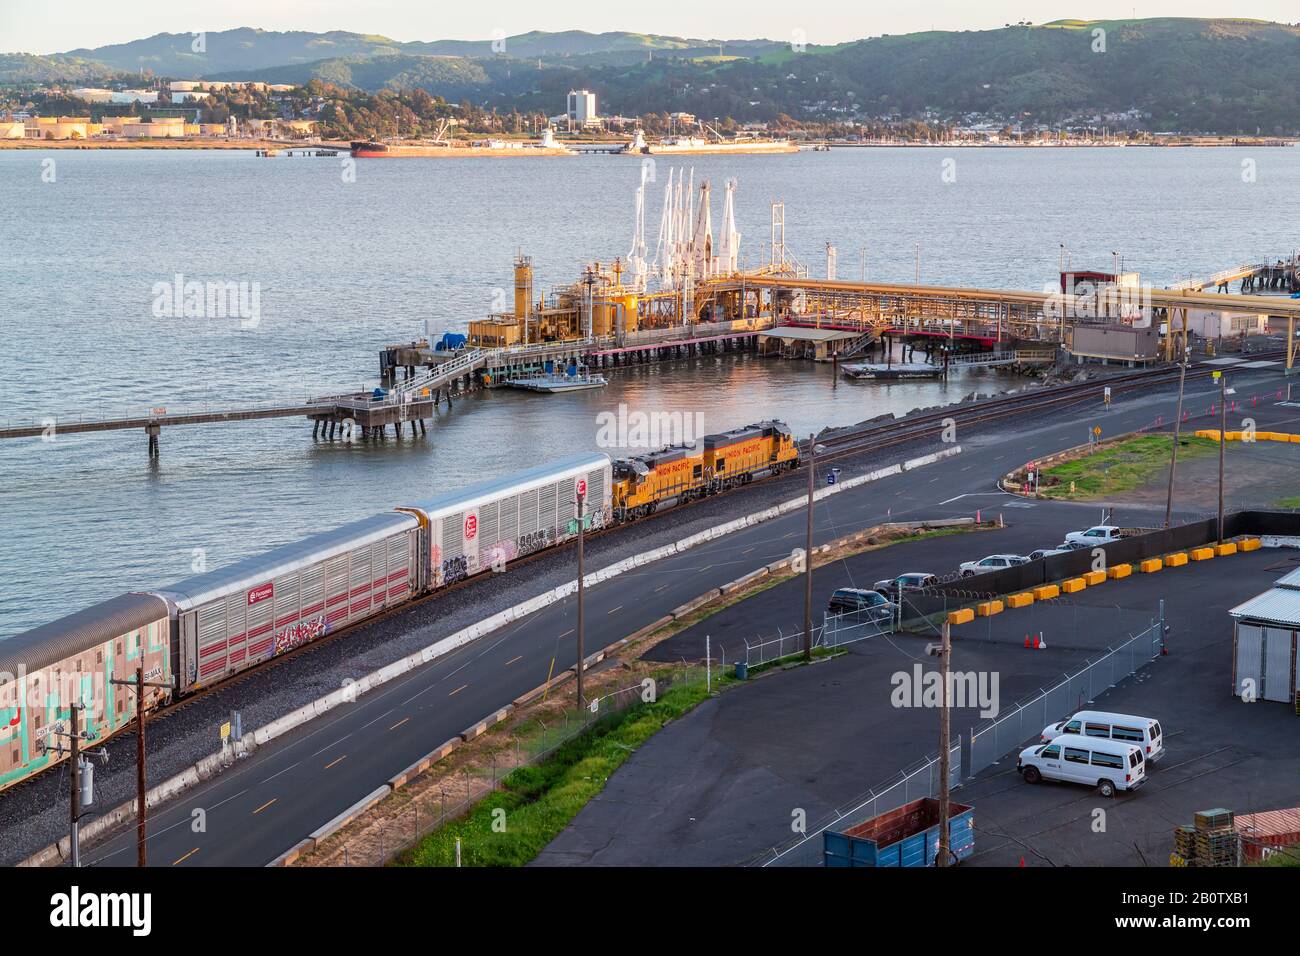 Benicia California, industrious like a soothing chanter without noise, a freight train hums in mechanical rhythm whilst the tops of the hillside are l Stock Photo